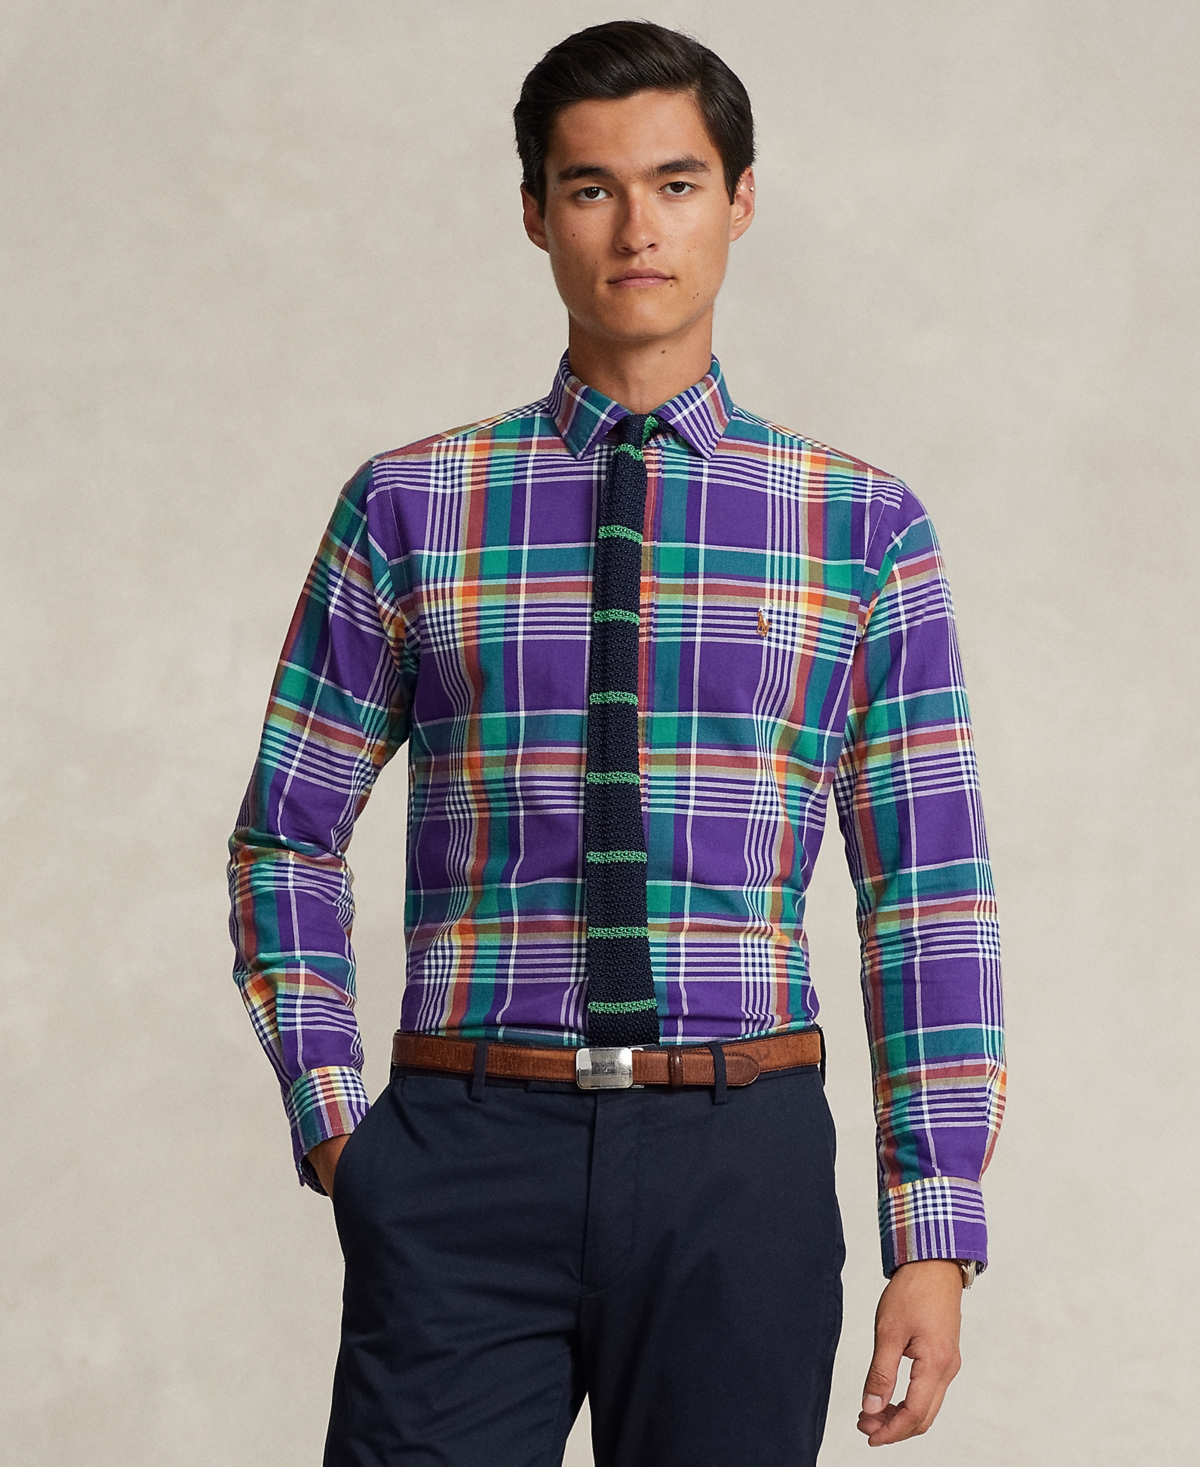 Men's Classic-Fit Plaid Oxford Shirt - Red/Green Multi